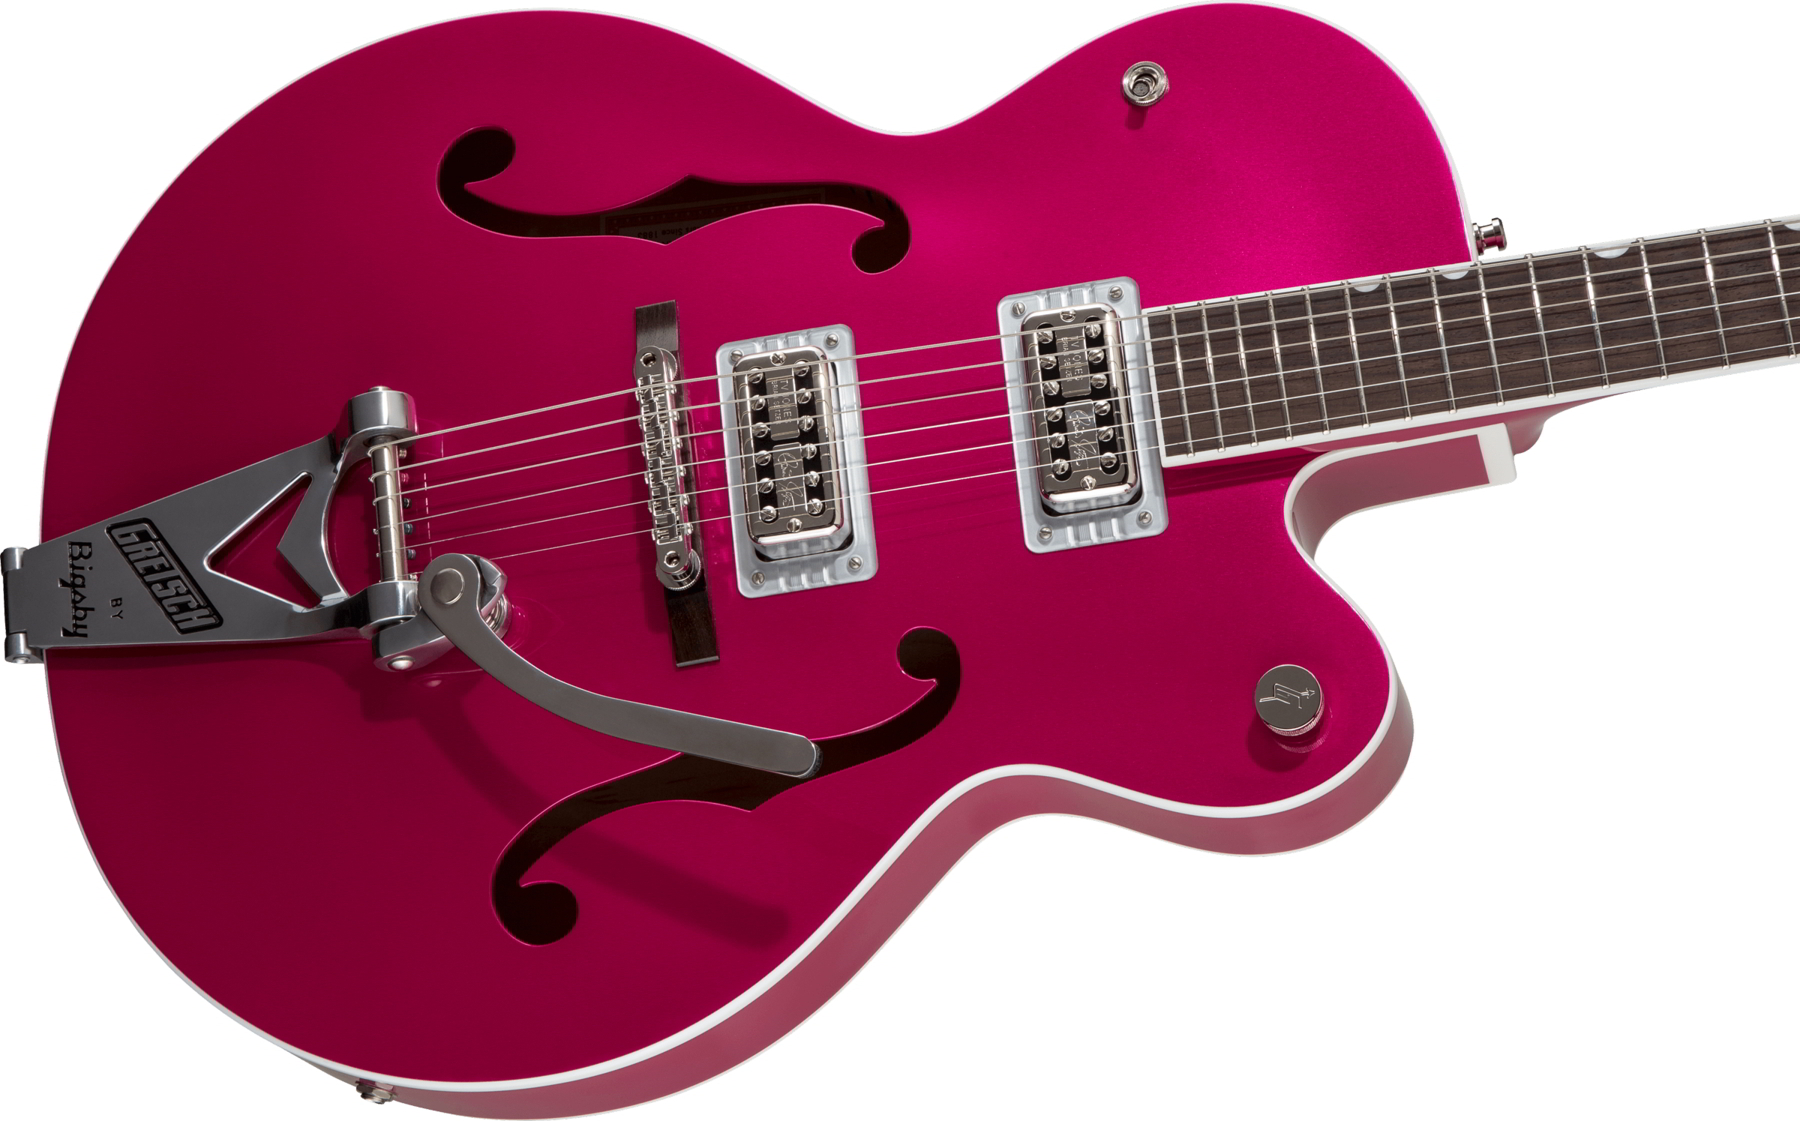 G6120T-HR Brian Setzer Signature Hot Rod Hollow Body with Bigsby, Rosewood Fingerboard, Candy Magenta追加画像